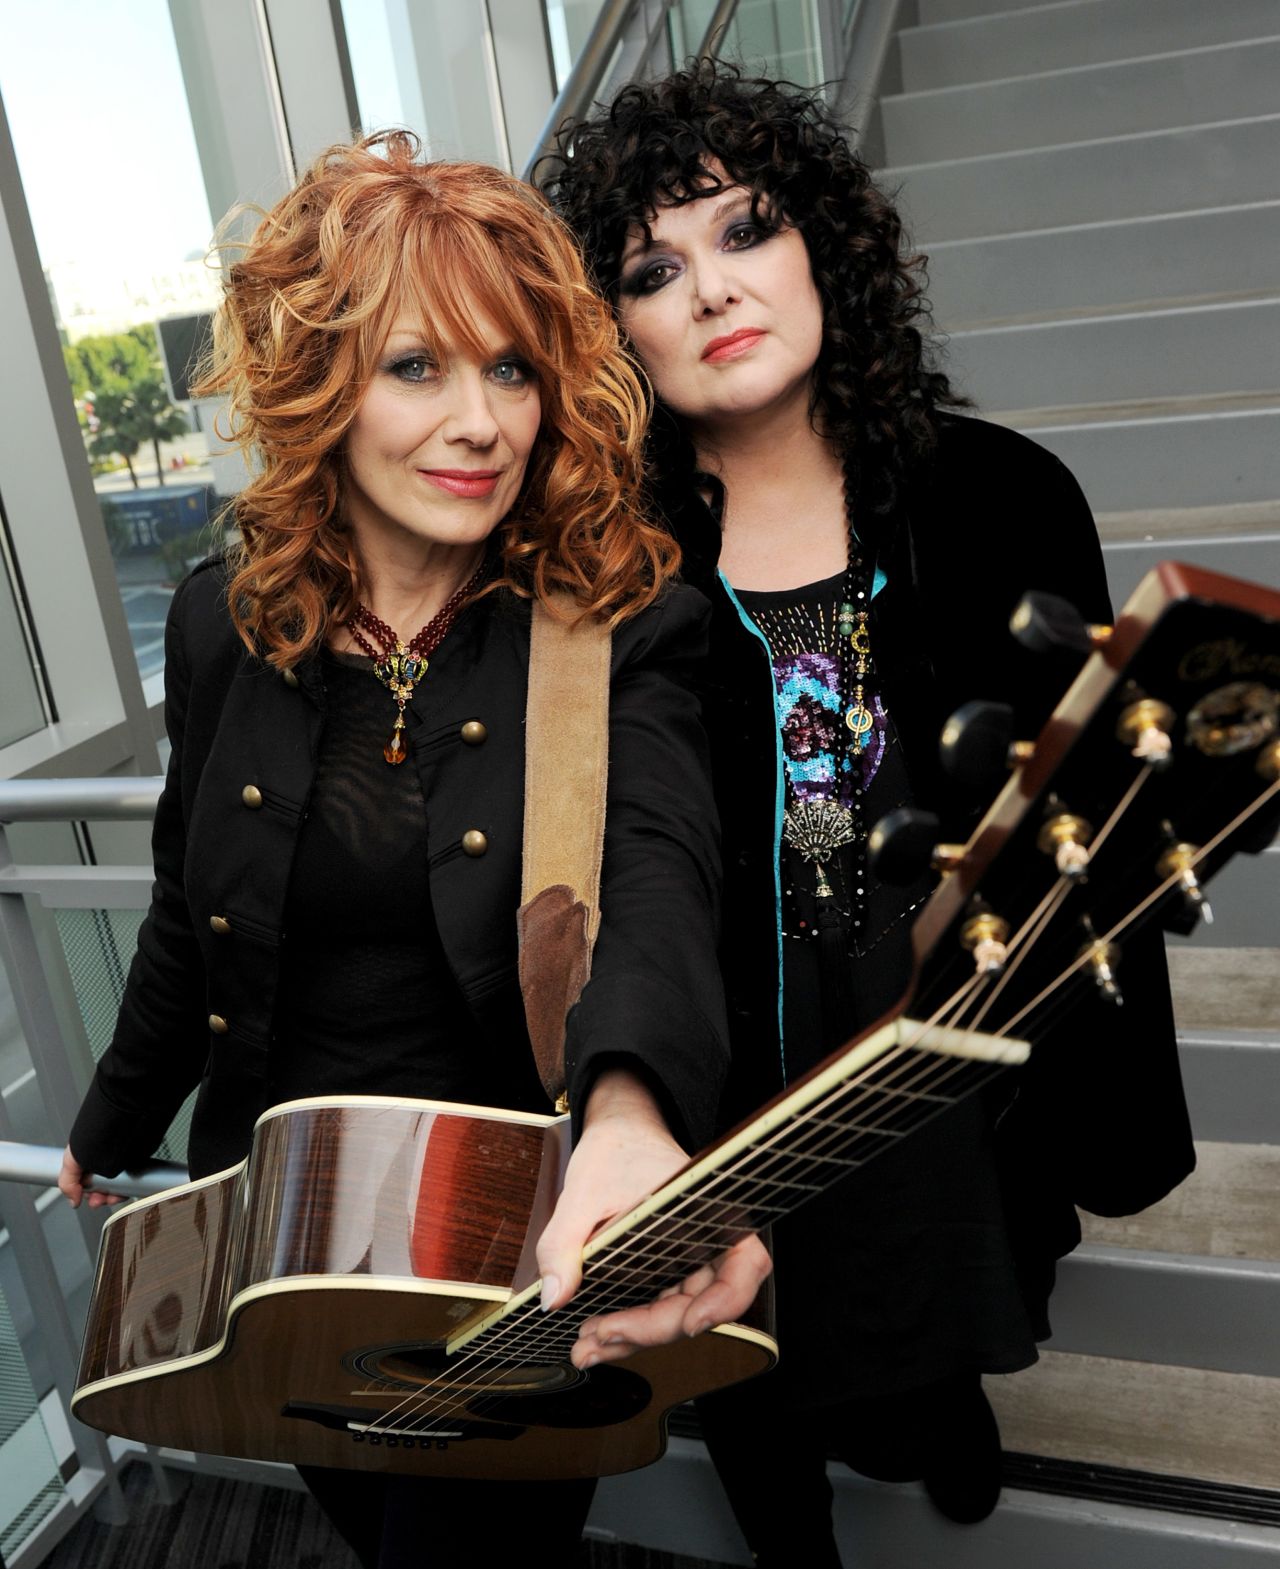 On December 7, sisters Ann and Nancy Wilson <a href="https://twitter.com/officialheart/status/409569032379977728" target="_blank" target="_blank">tweeted</a>, "Heart has chosen to decline their forthcoming performance at SeaWorld on 2/9/14 due to the controversial documentary film 'Black Fish.' " Nancy, left, <a href="https://twitter.com/NancyHeartMusic/status/409210287514853377" target="_blank" target="_blank">wrote</a>, "The Sea World show was planned long ago as an Orlando show. Had we known, we'd have said no then. We said no today. Love you all." 